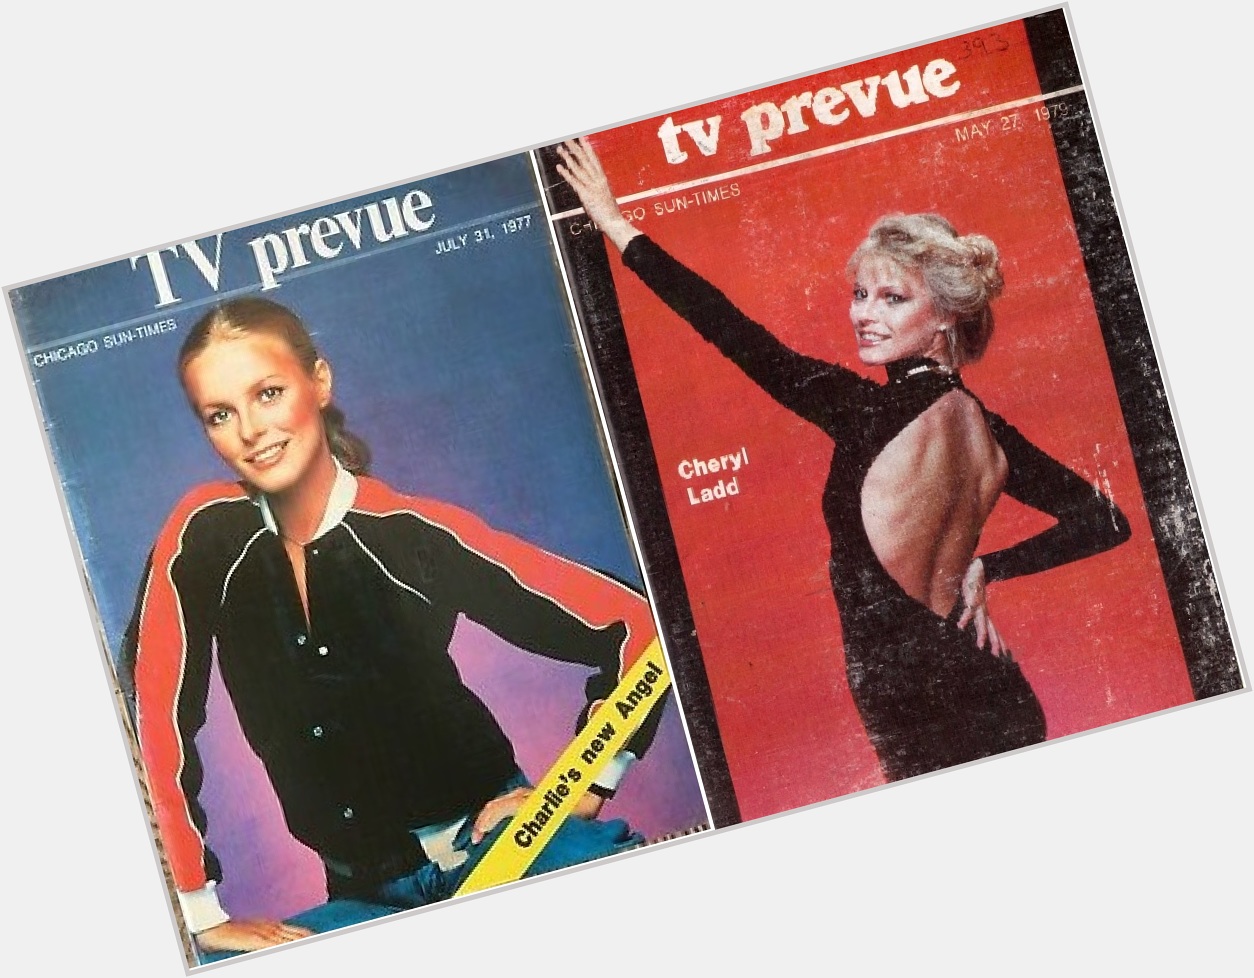 Happy Birthday to Cheryl Ladd, born on this day in 1951
Chicago Sun-Times TV Prevue.  1977 and 1979 